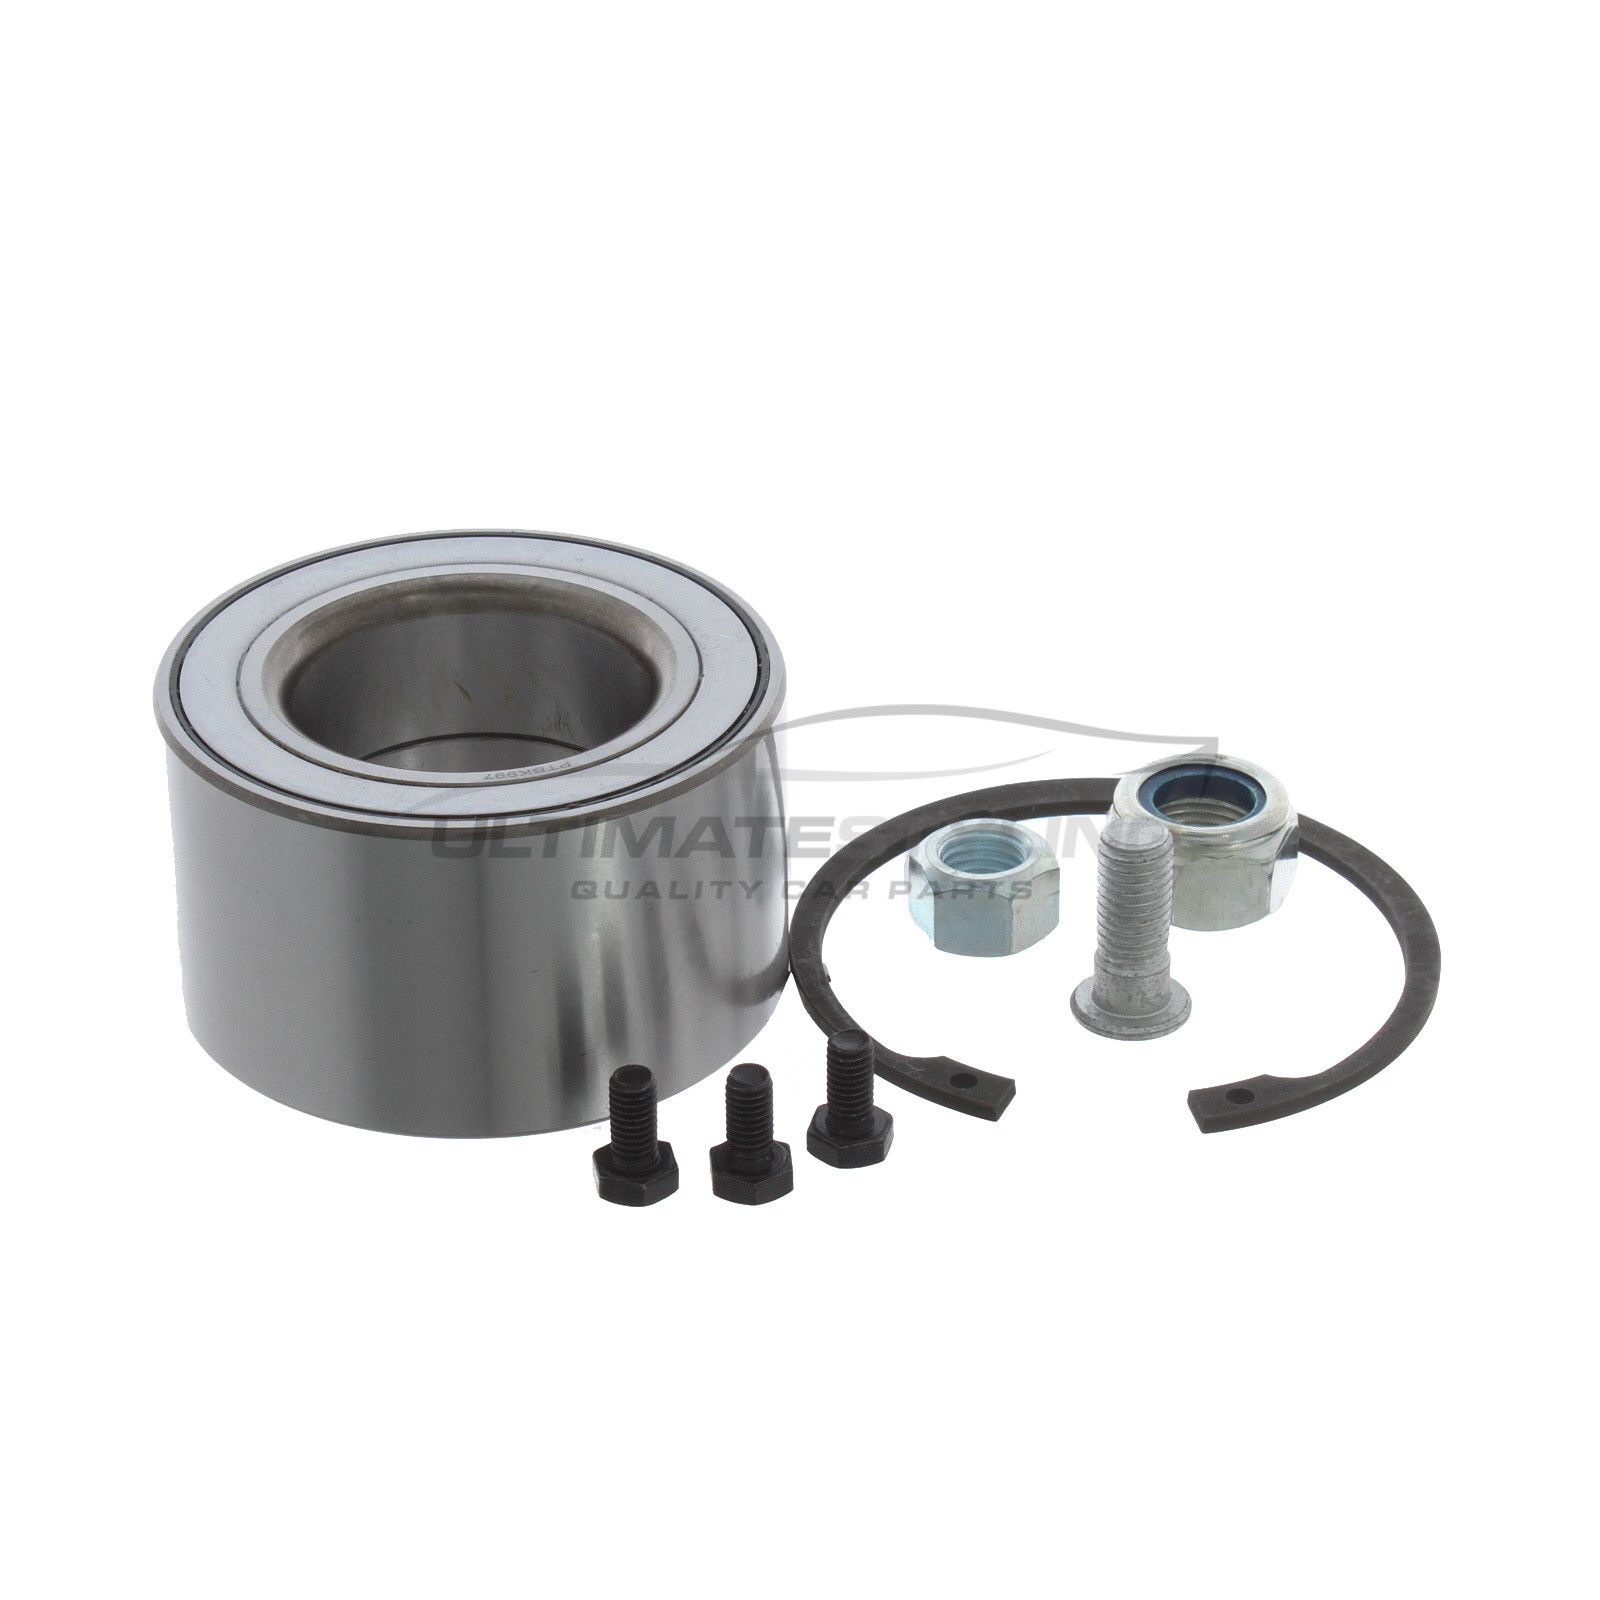 Front <span style="color:red;"><strong>OR</strong></span> Rear Wheel Bearing Kit for VW Multivan